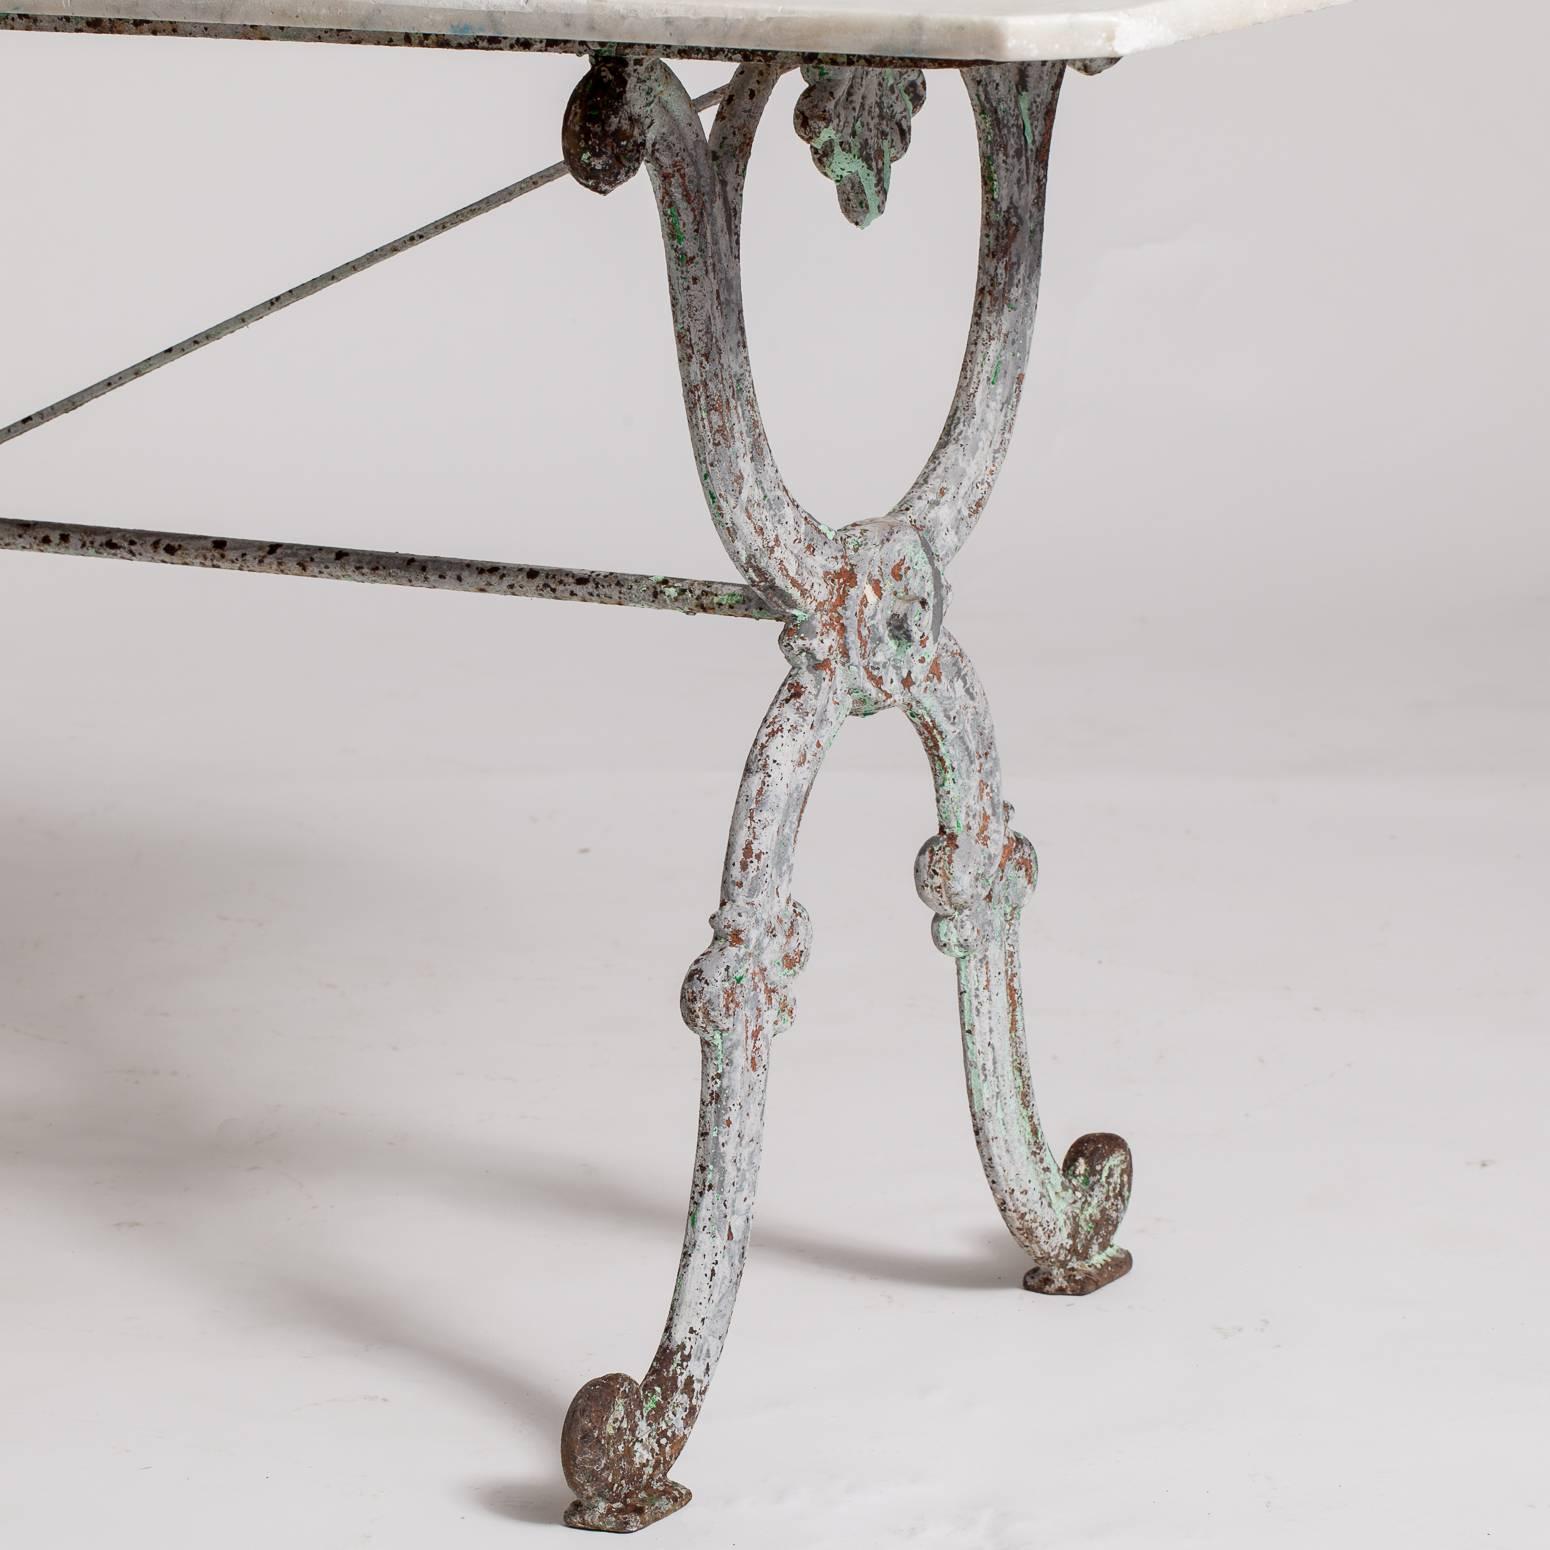 This beautifully proportioned table has a cast iron base with a central medallion and traces of the original green paint remaining. The marble top with unusual squared off corners has a great patina and is in good condition.

$5,900.
Measures: